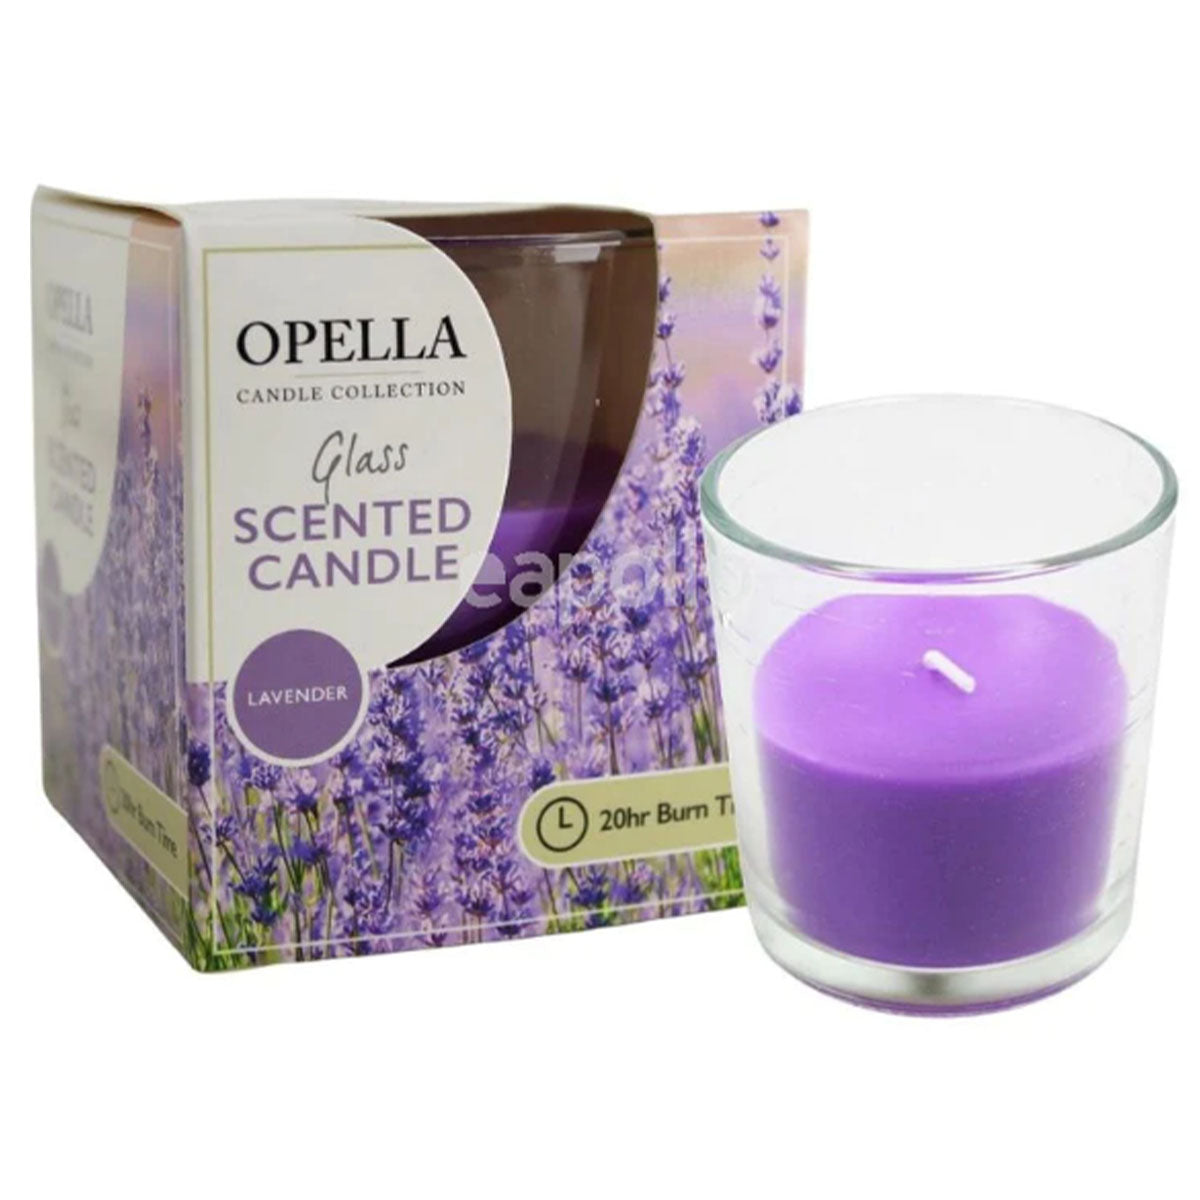 Opella - Candle Collection Lavender Scented Glass Candle  20hr Burn Time - 255g - Continental Food Store